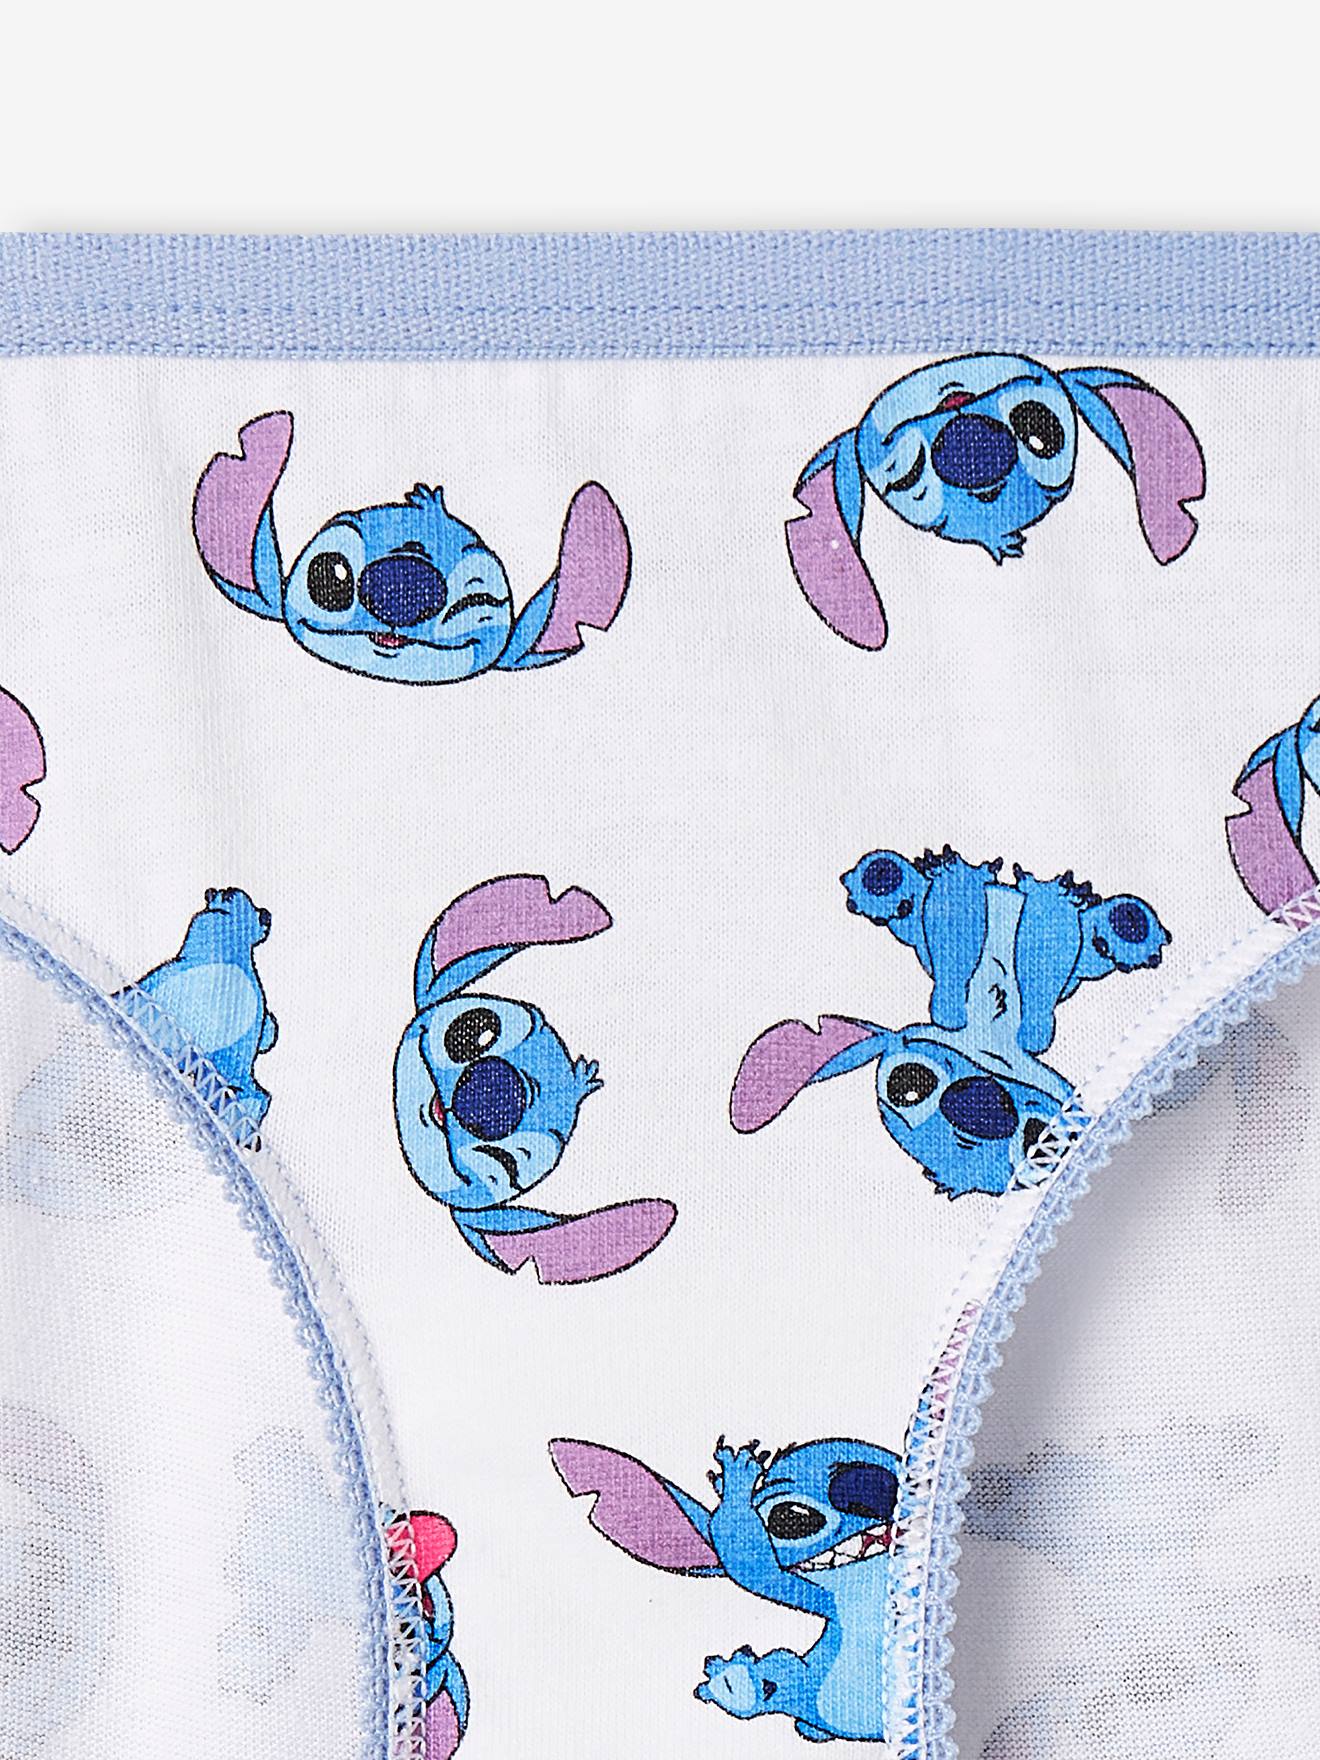 Pack of 5 Stitch Briefs for Girls, by Disney® - sky blue, Girls